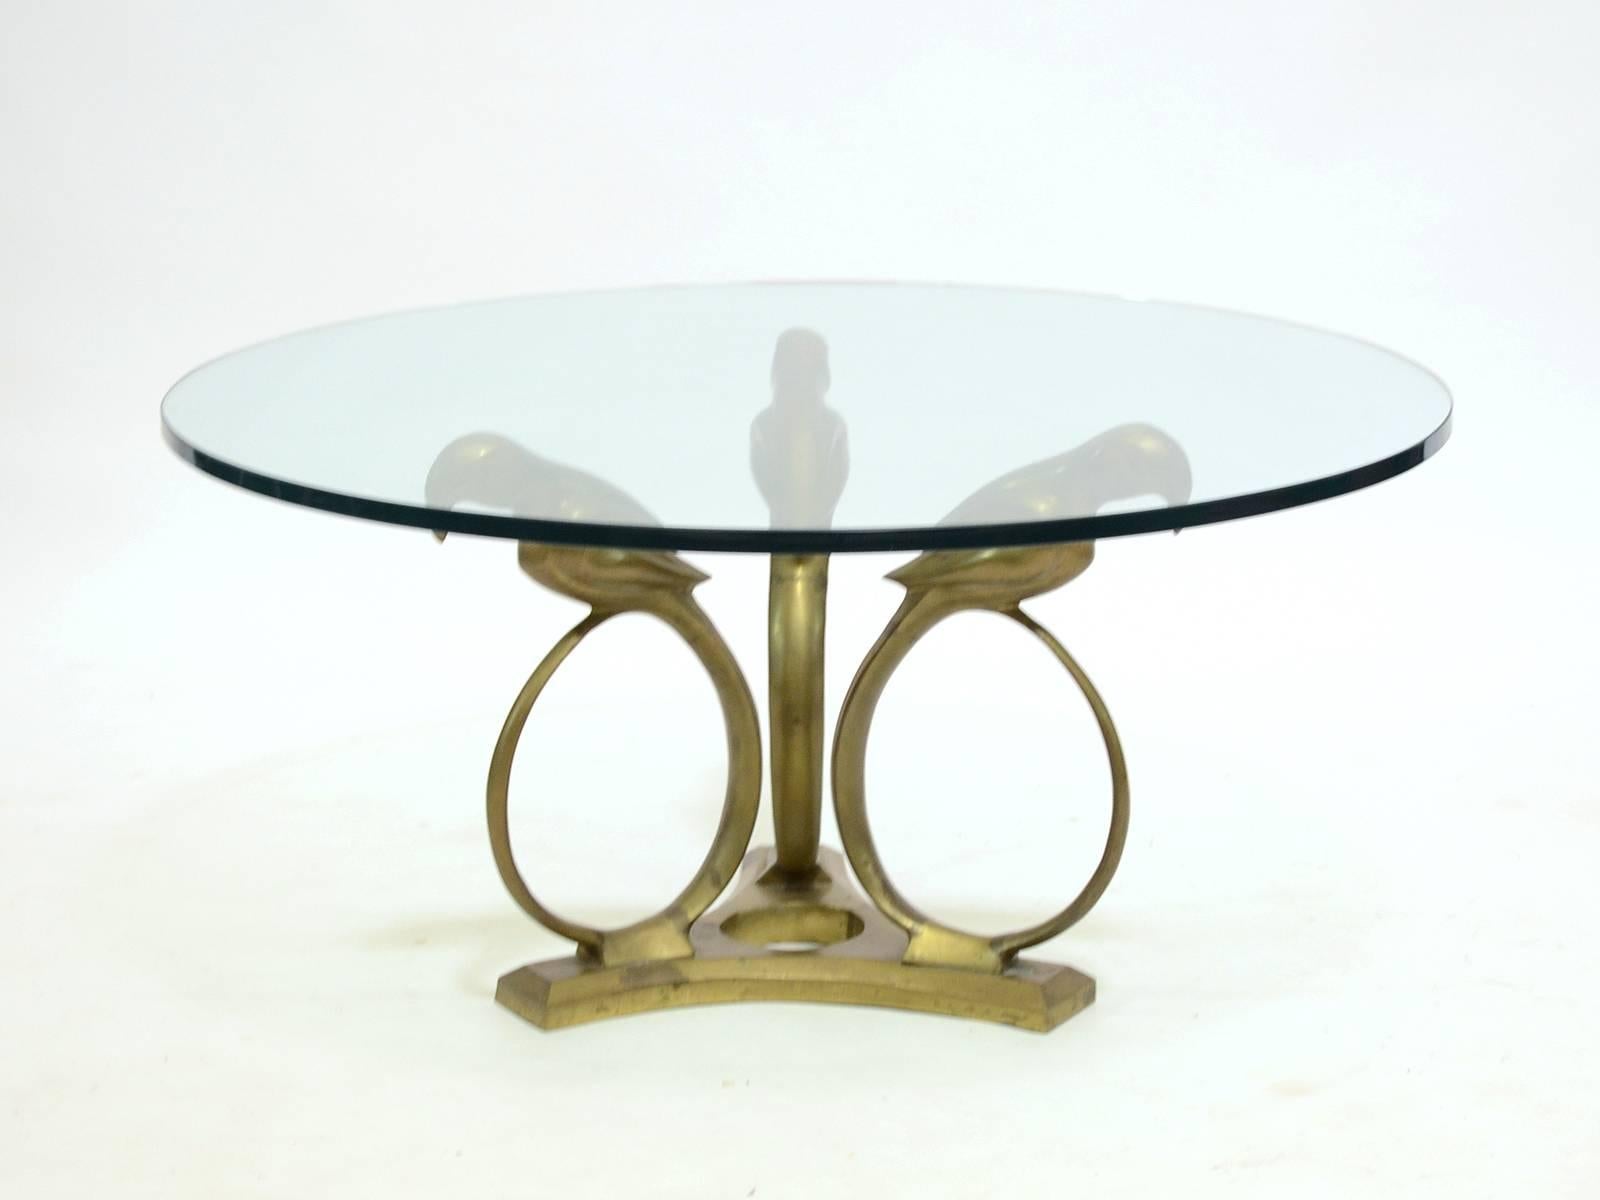 American Stylized Deco Moderne Brass Parrot Coffee Table